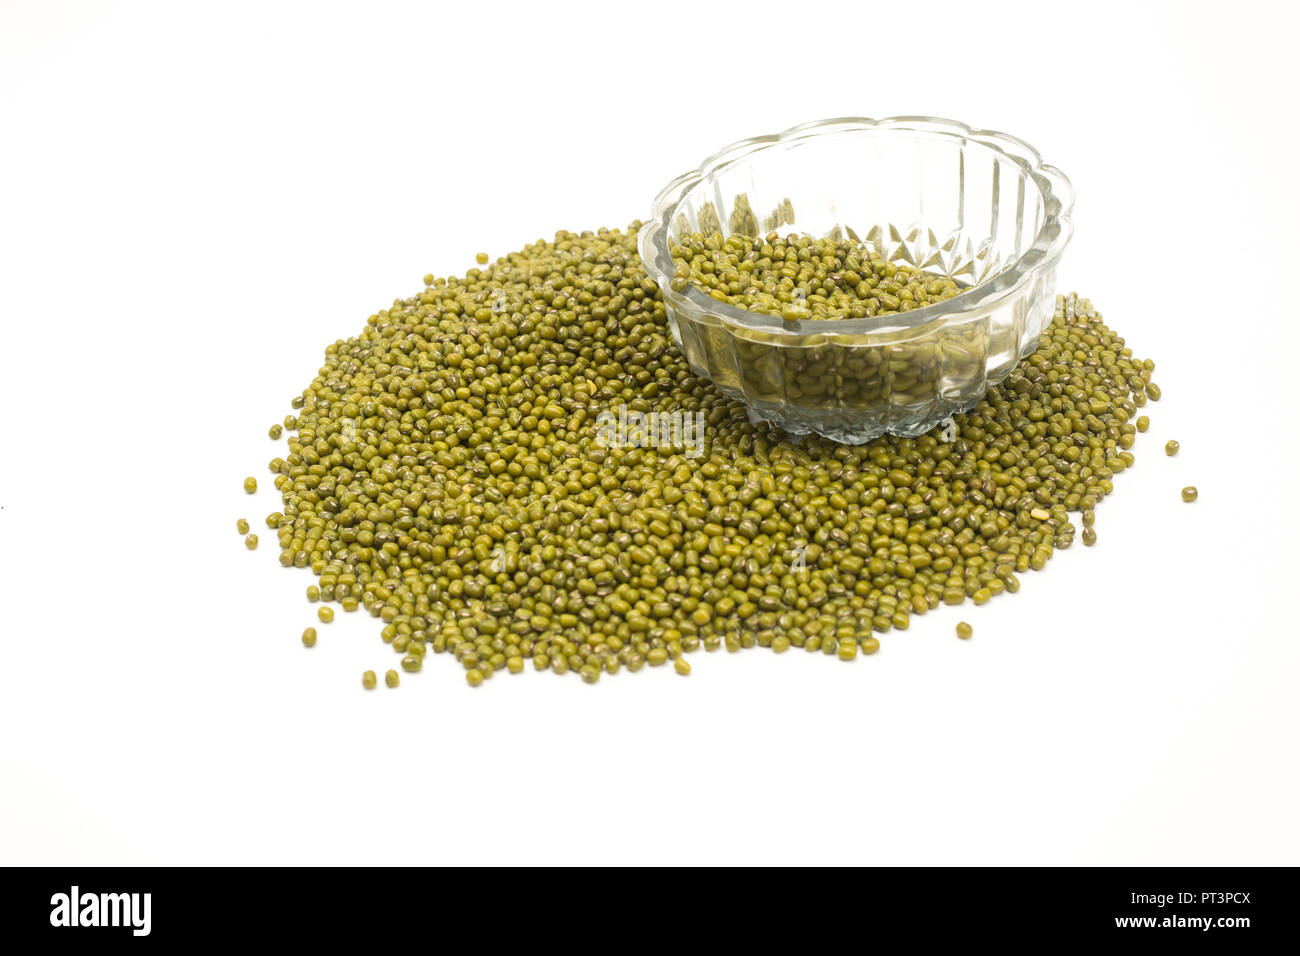 Green mung beans or mung dal isolated on white background. Stock Photo